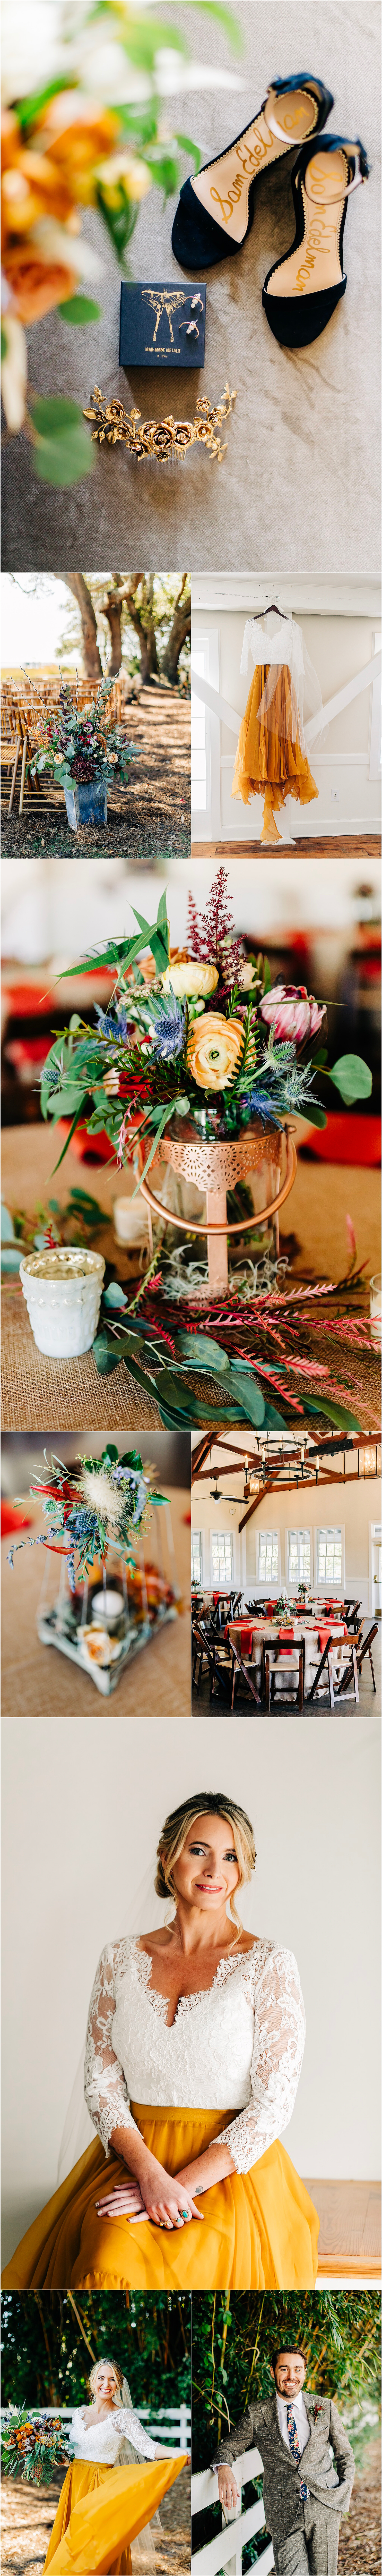 Details and Getting Ready, Boho Chic Wedding at Alhambra Hall
